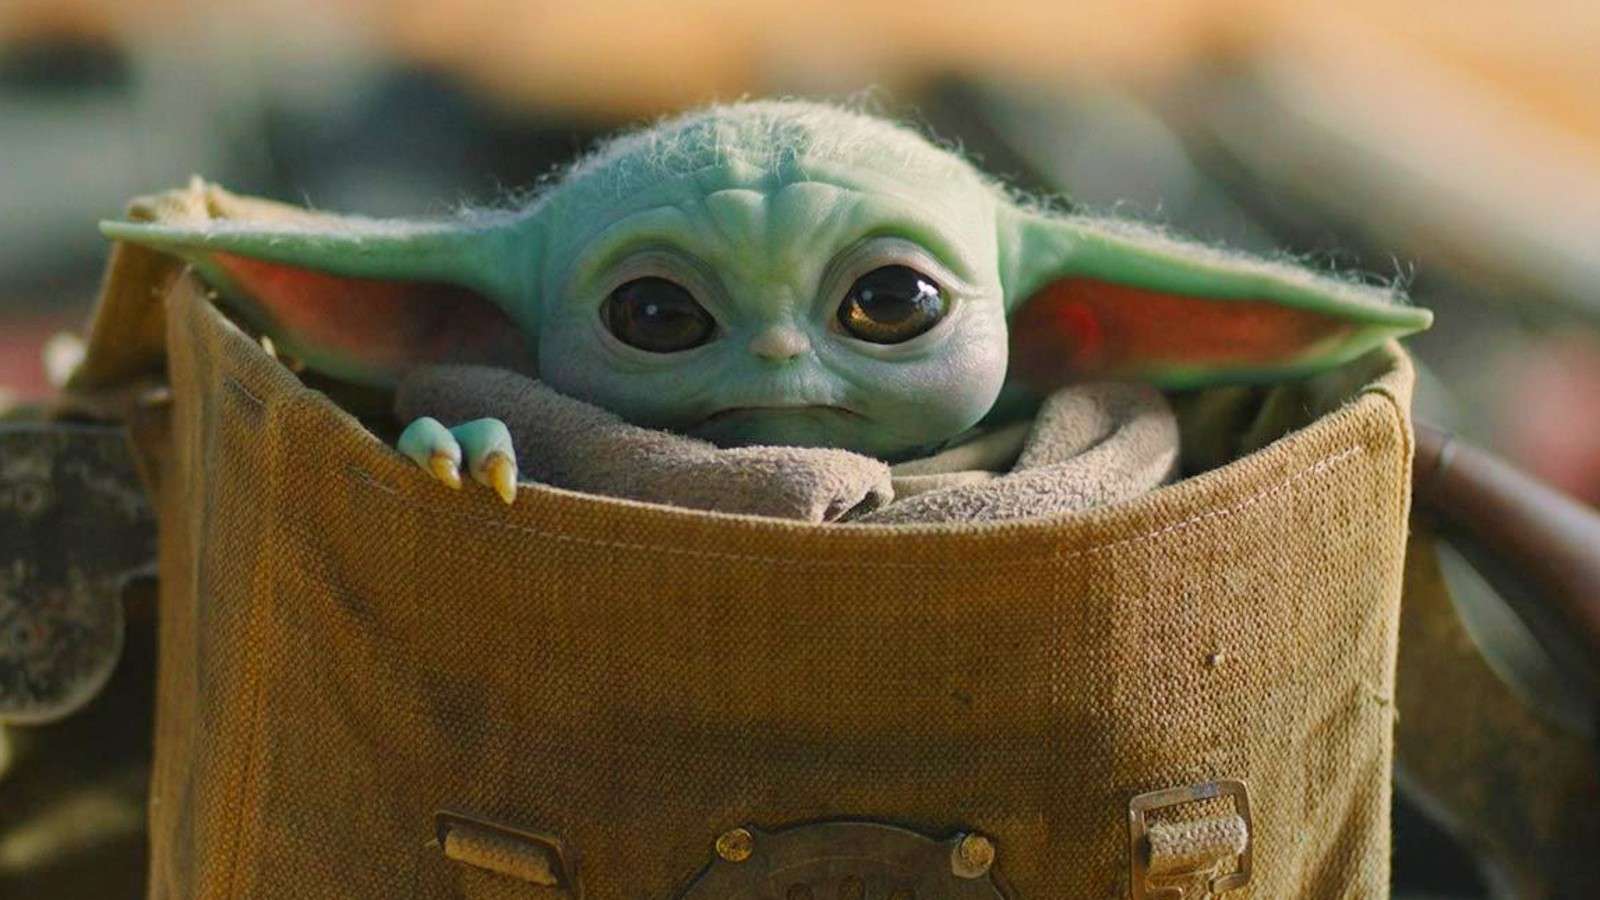 Grogu, also known as Baby Yoda, in The Mandalorian